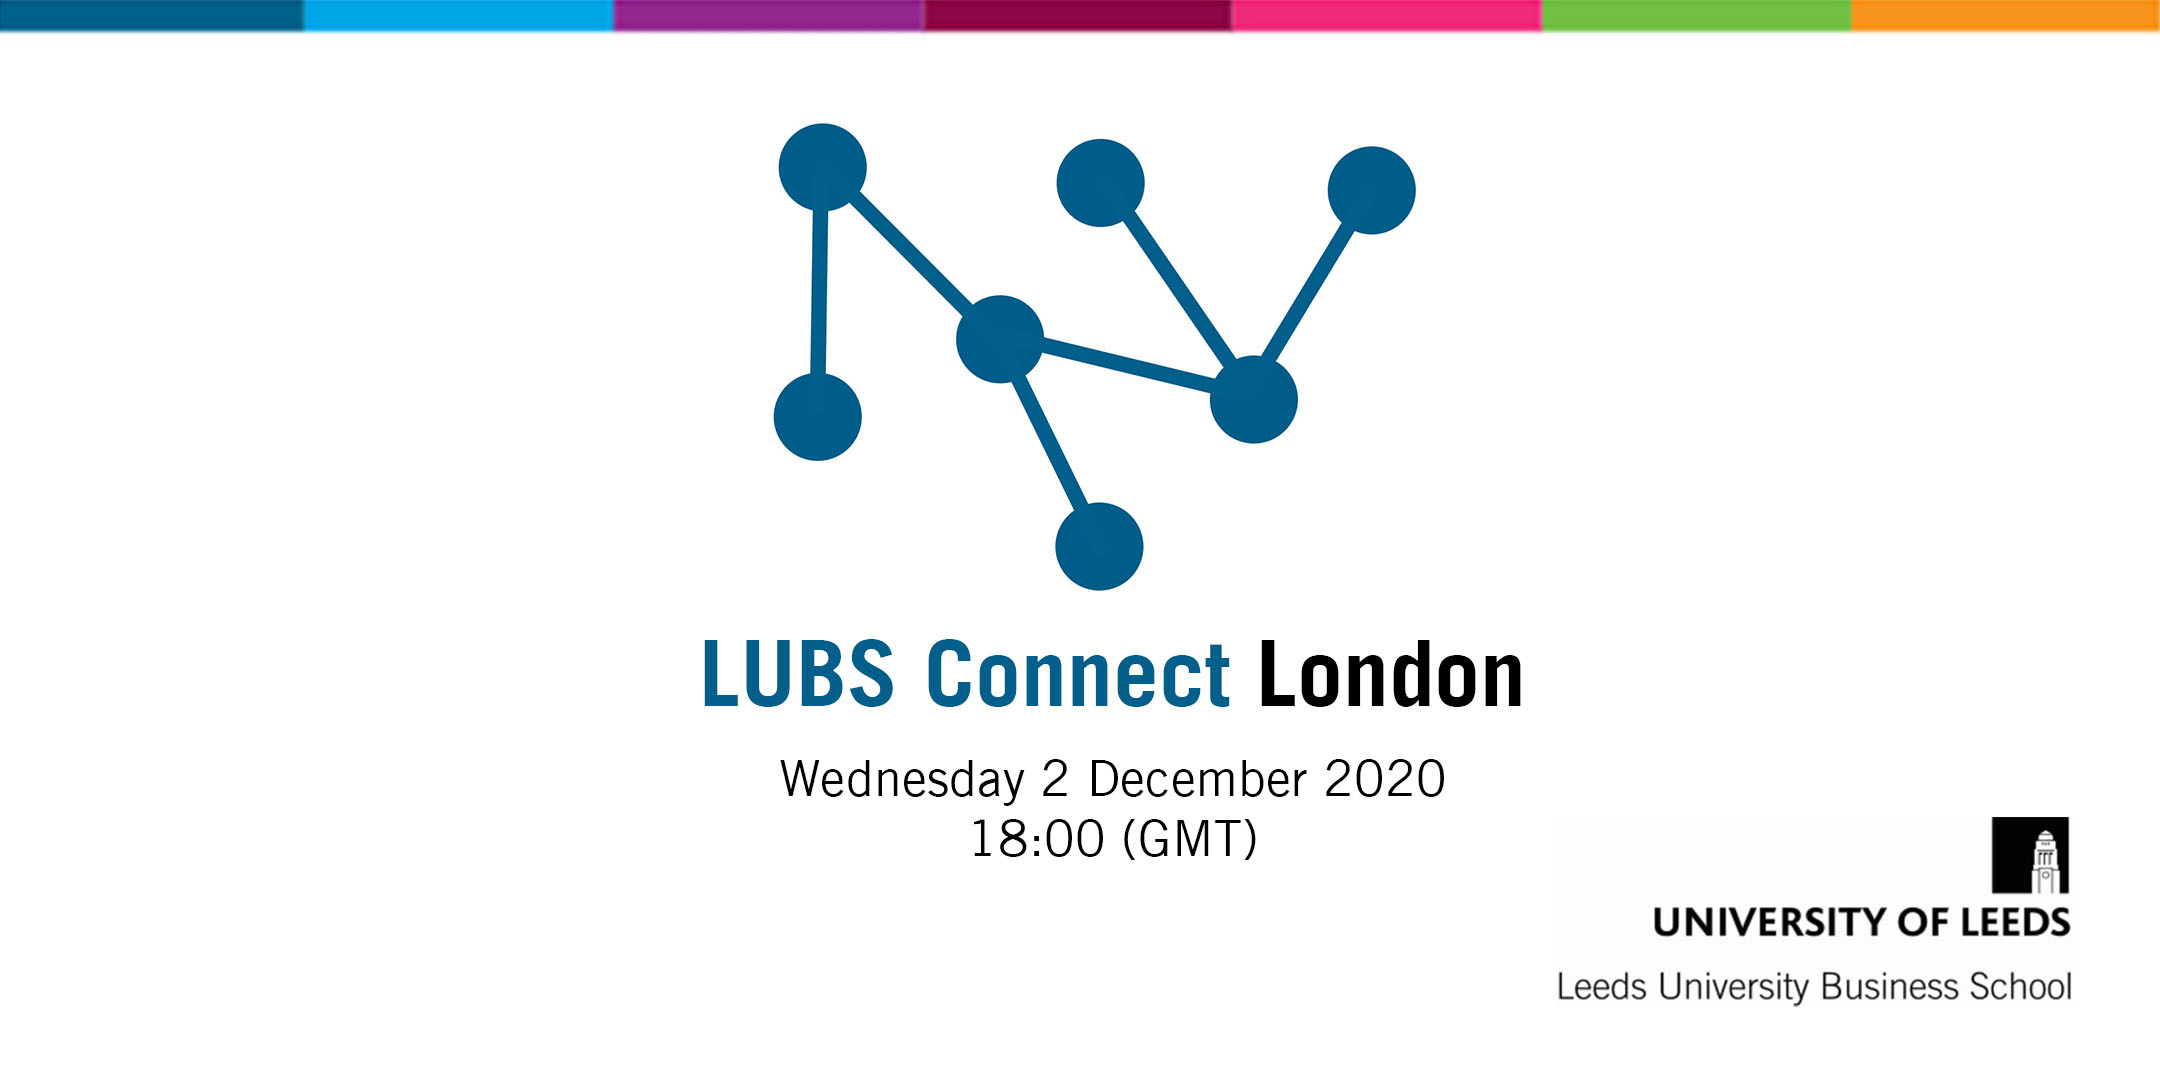 LUBS Connect London